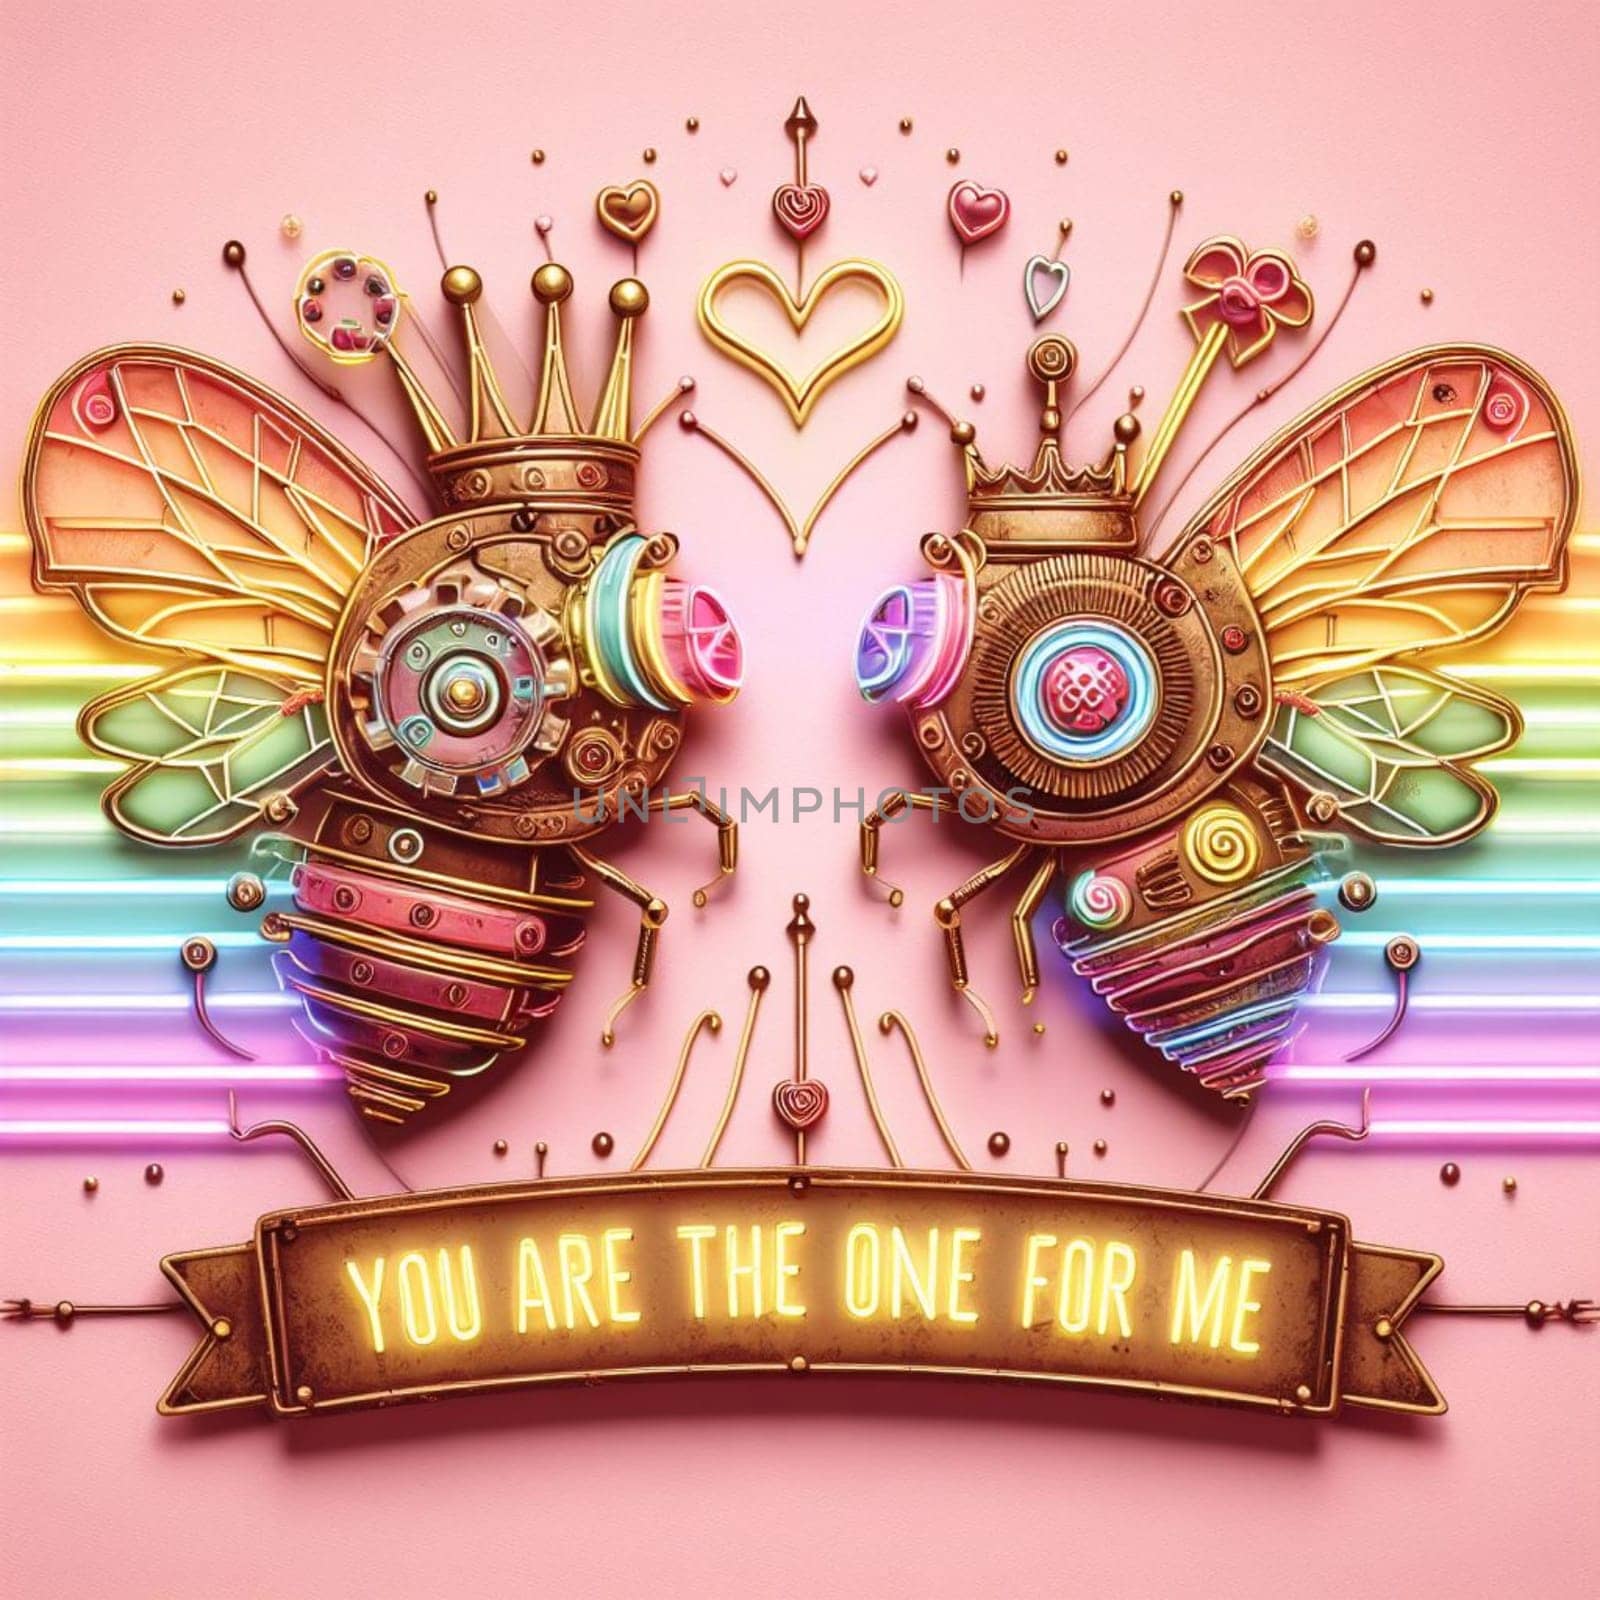 steampunk bee king and queen in love neon sign valentines illustration concept rusty background by verbano